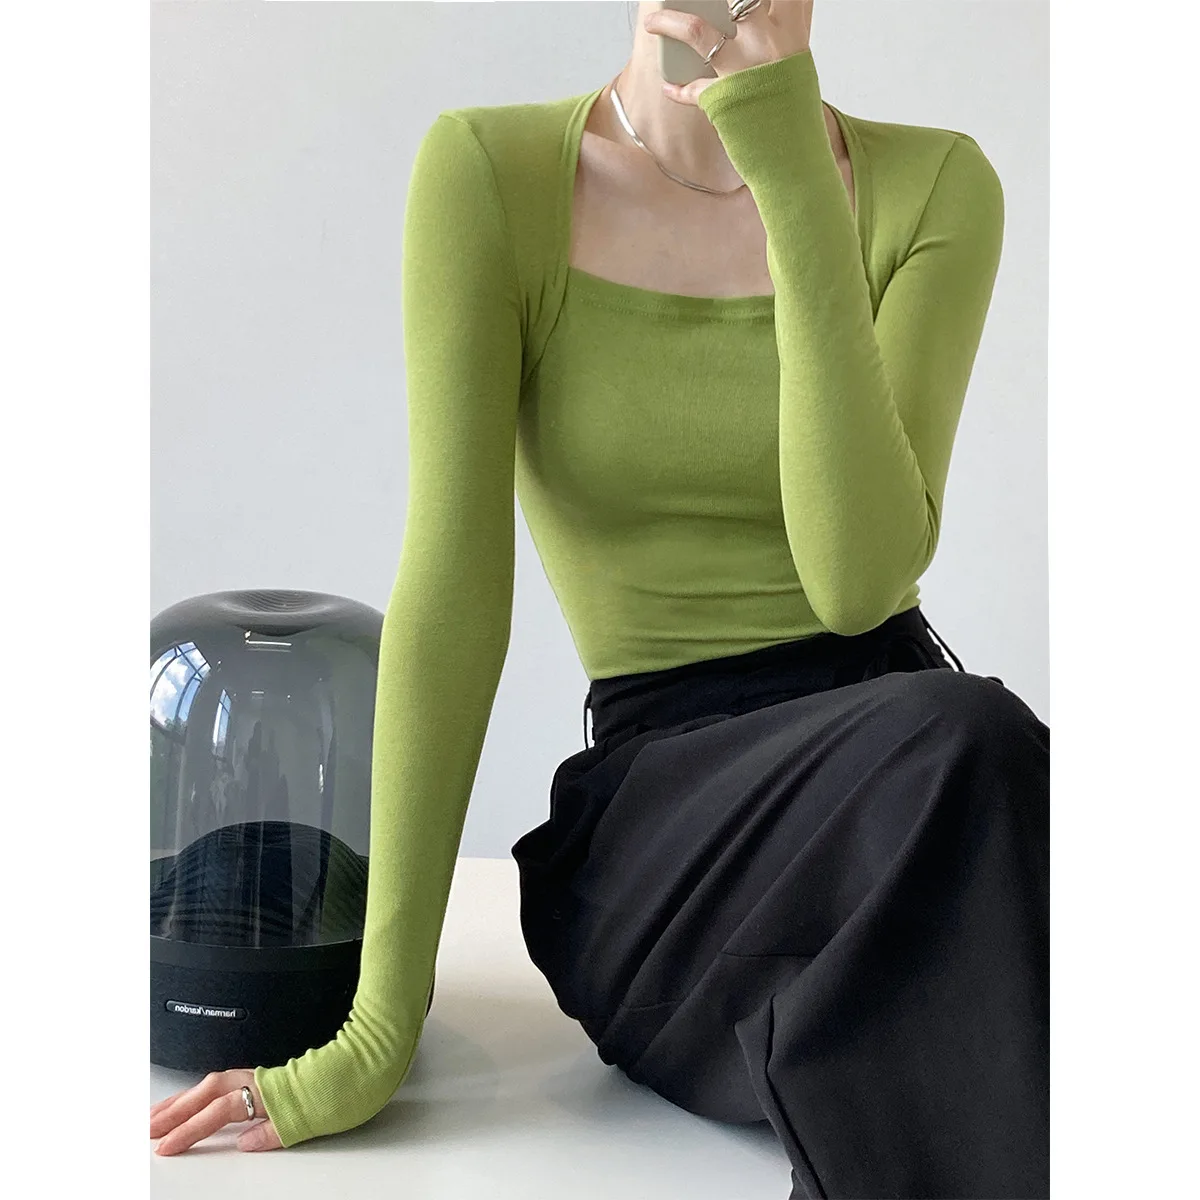 French gentle long-sleeved square-neck t-shirt women's slim fake two-piece top autumn solid color bottoming shirt